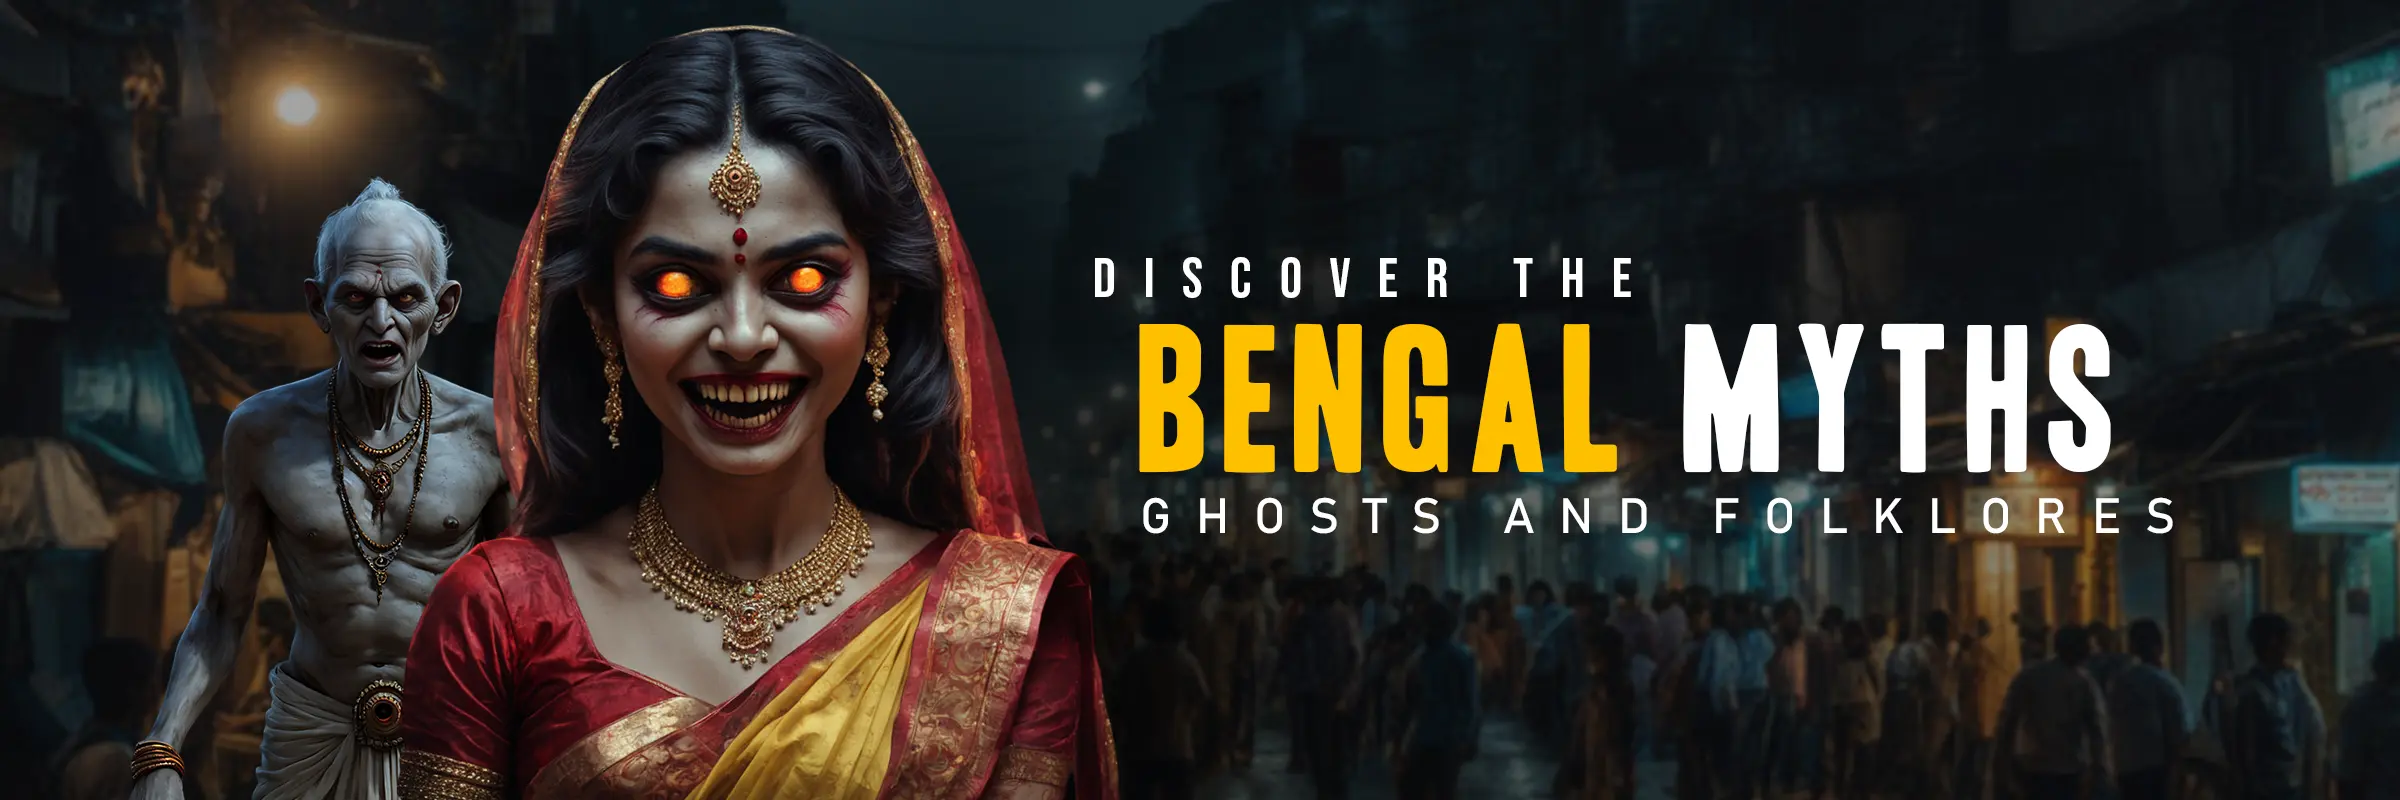 BENGAL FOLKLORE AND MYTHS